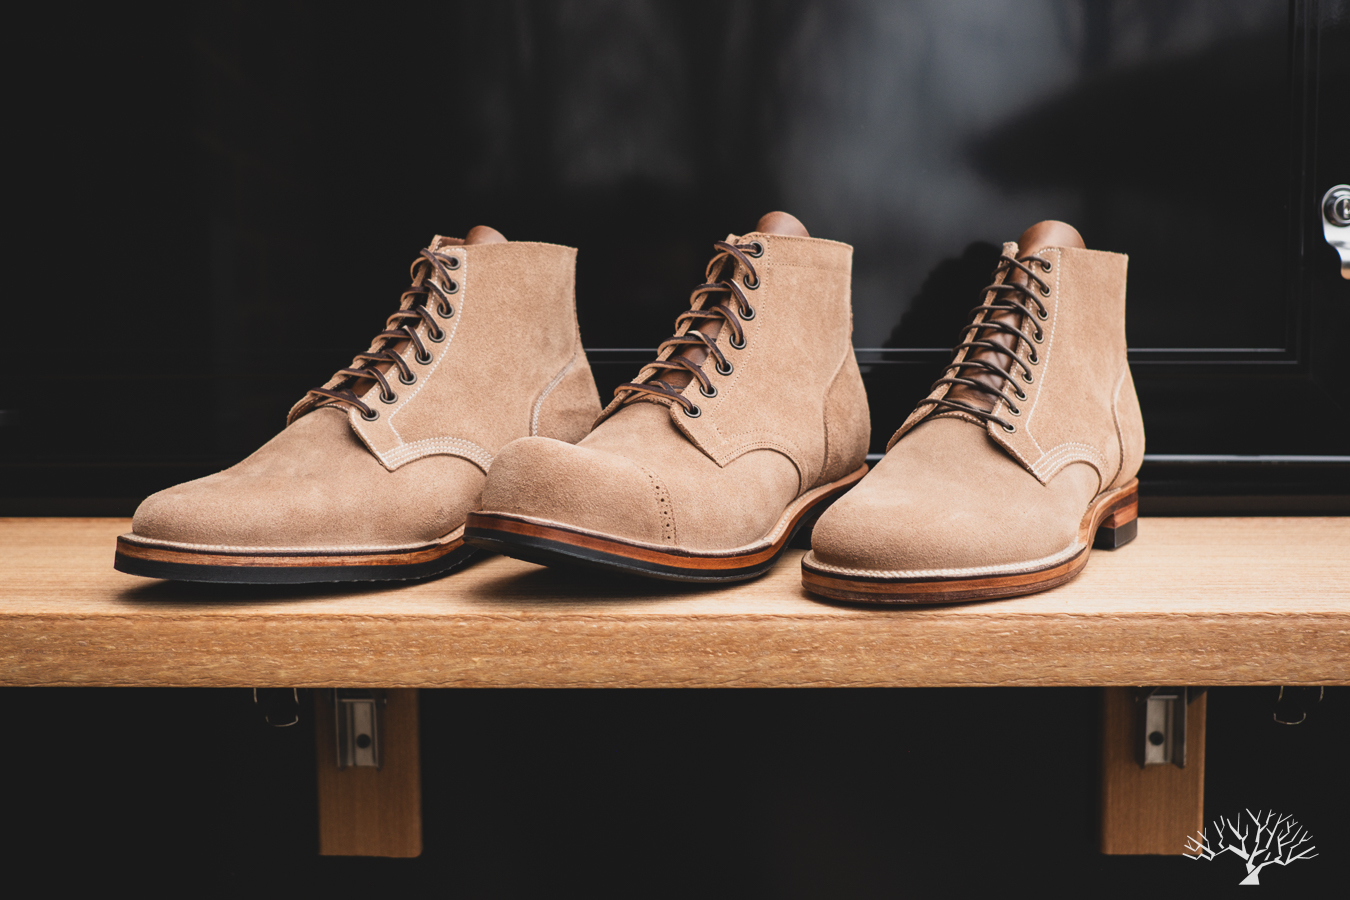 Viberg N-1 Field Shoes Collection Comparison